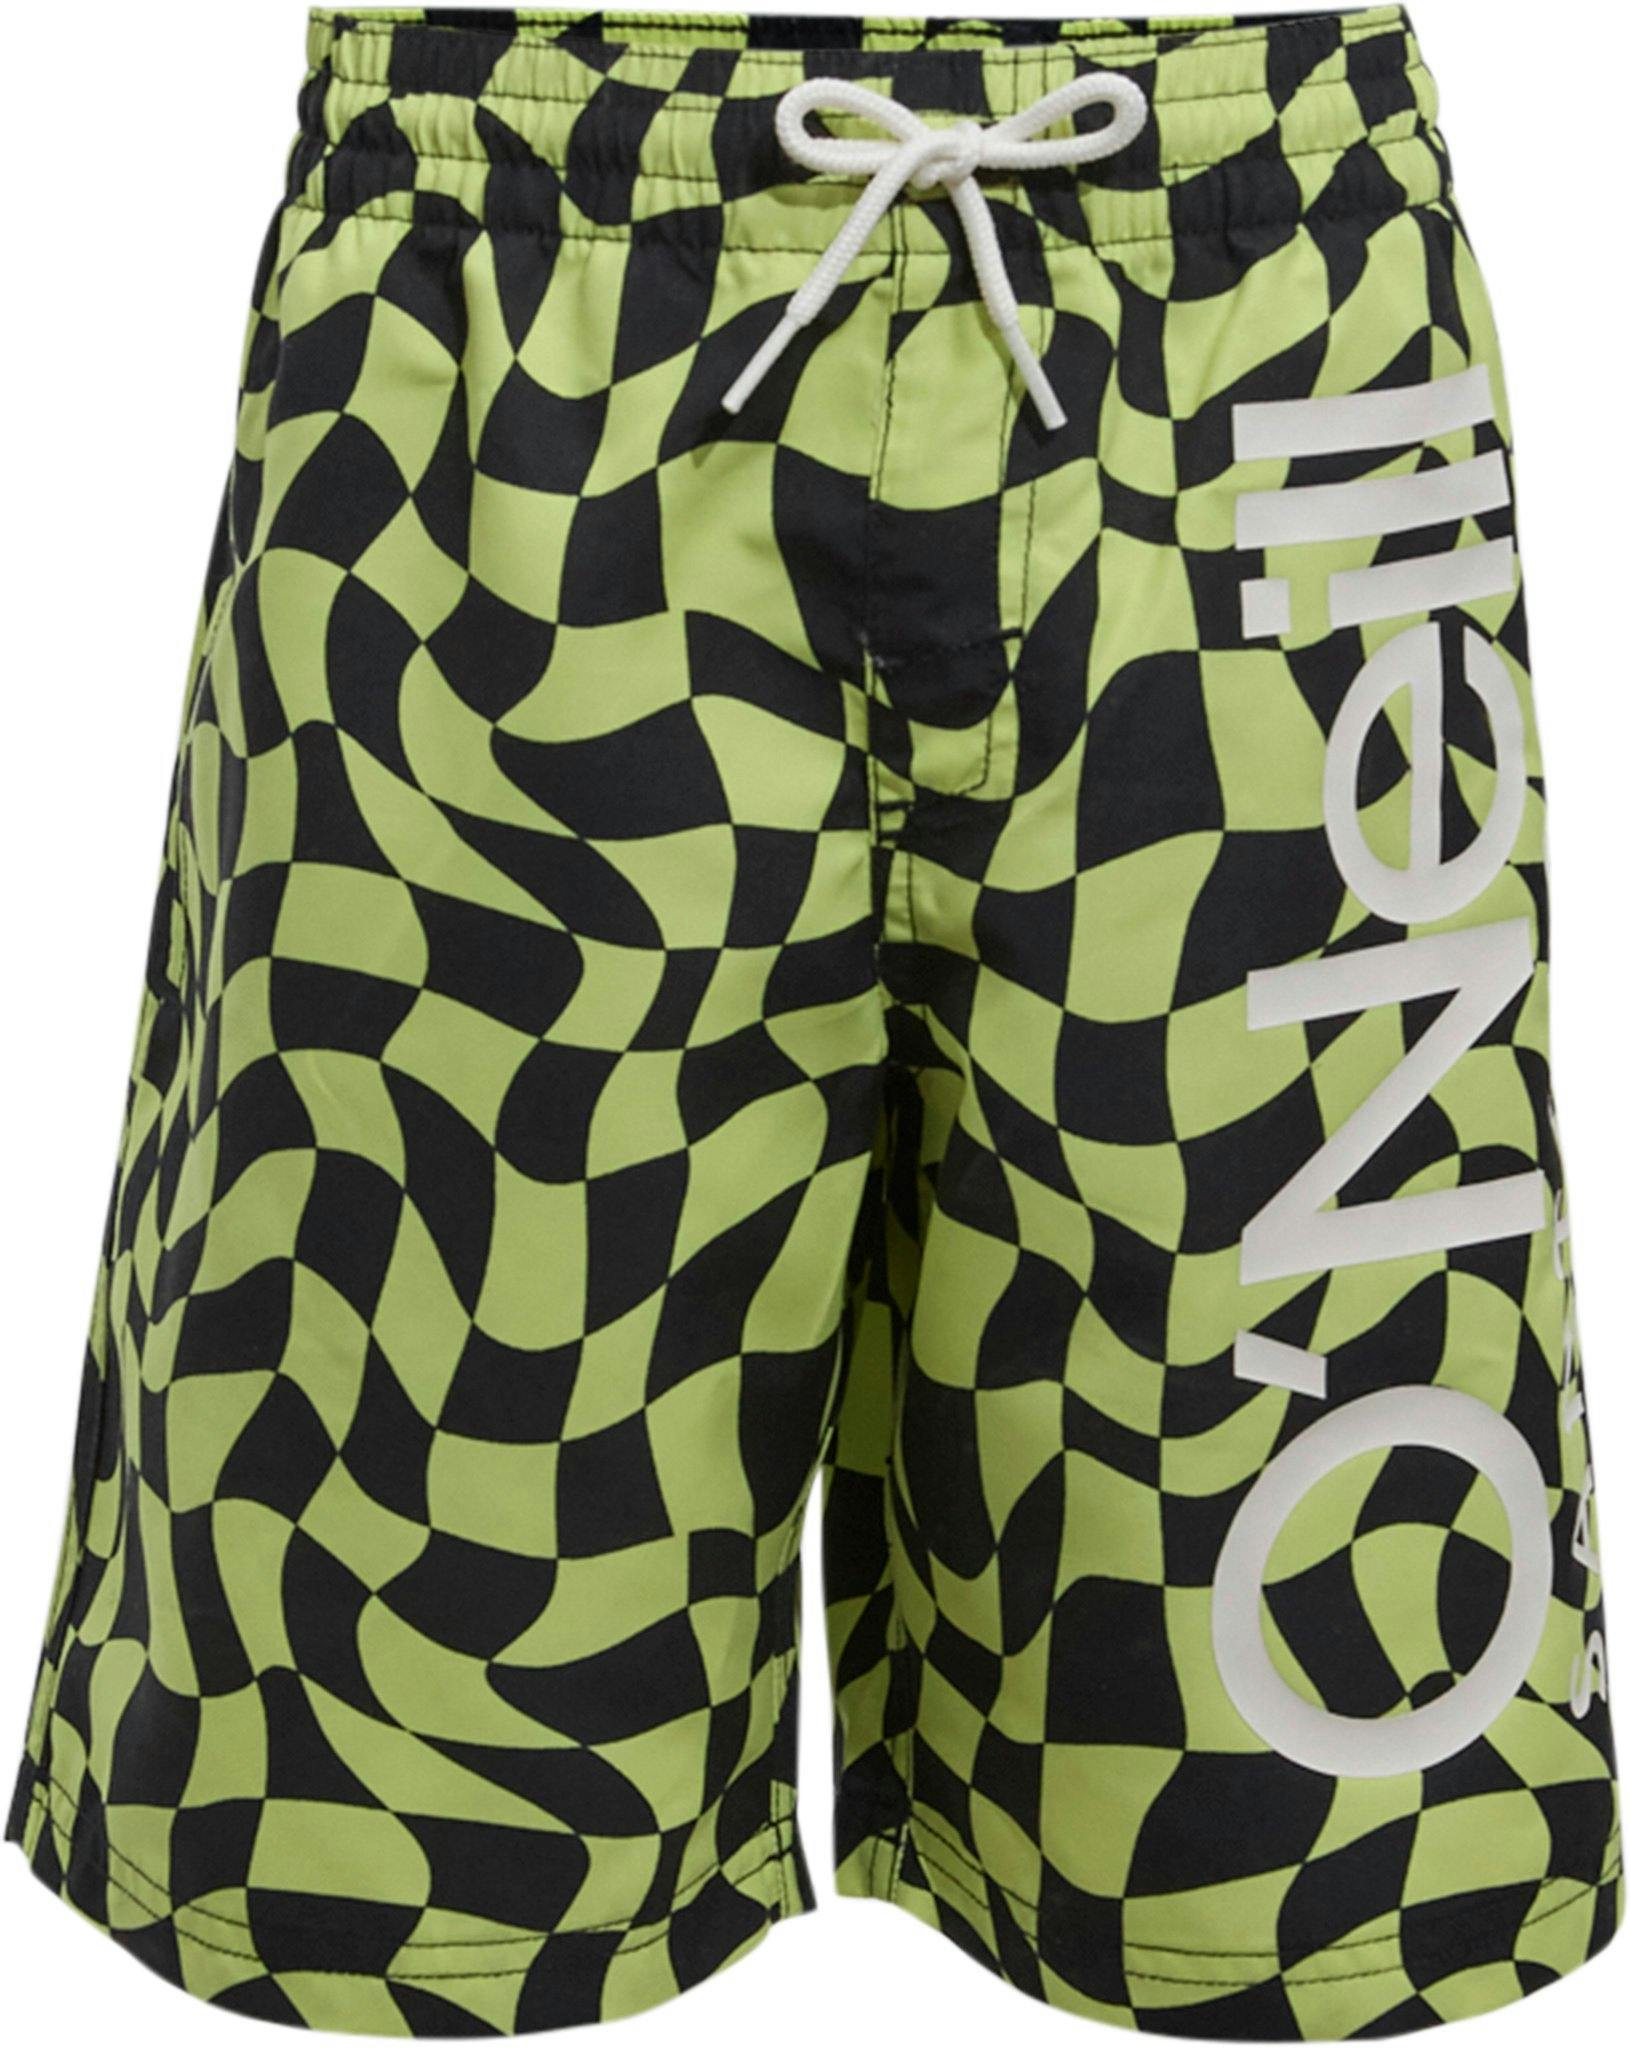 Product image for Cali Crazy Volley Swim Shorts 14" - Boys